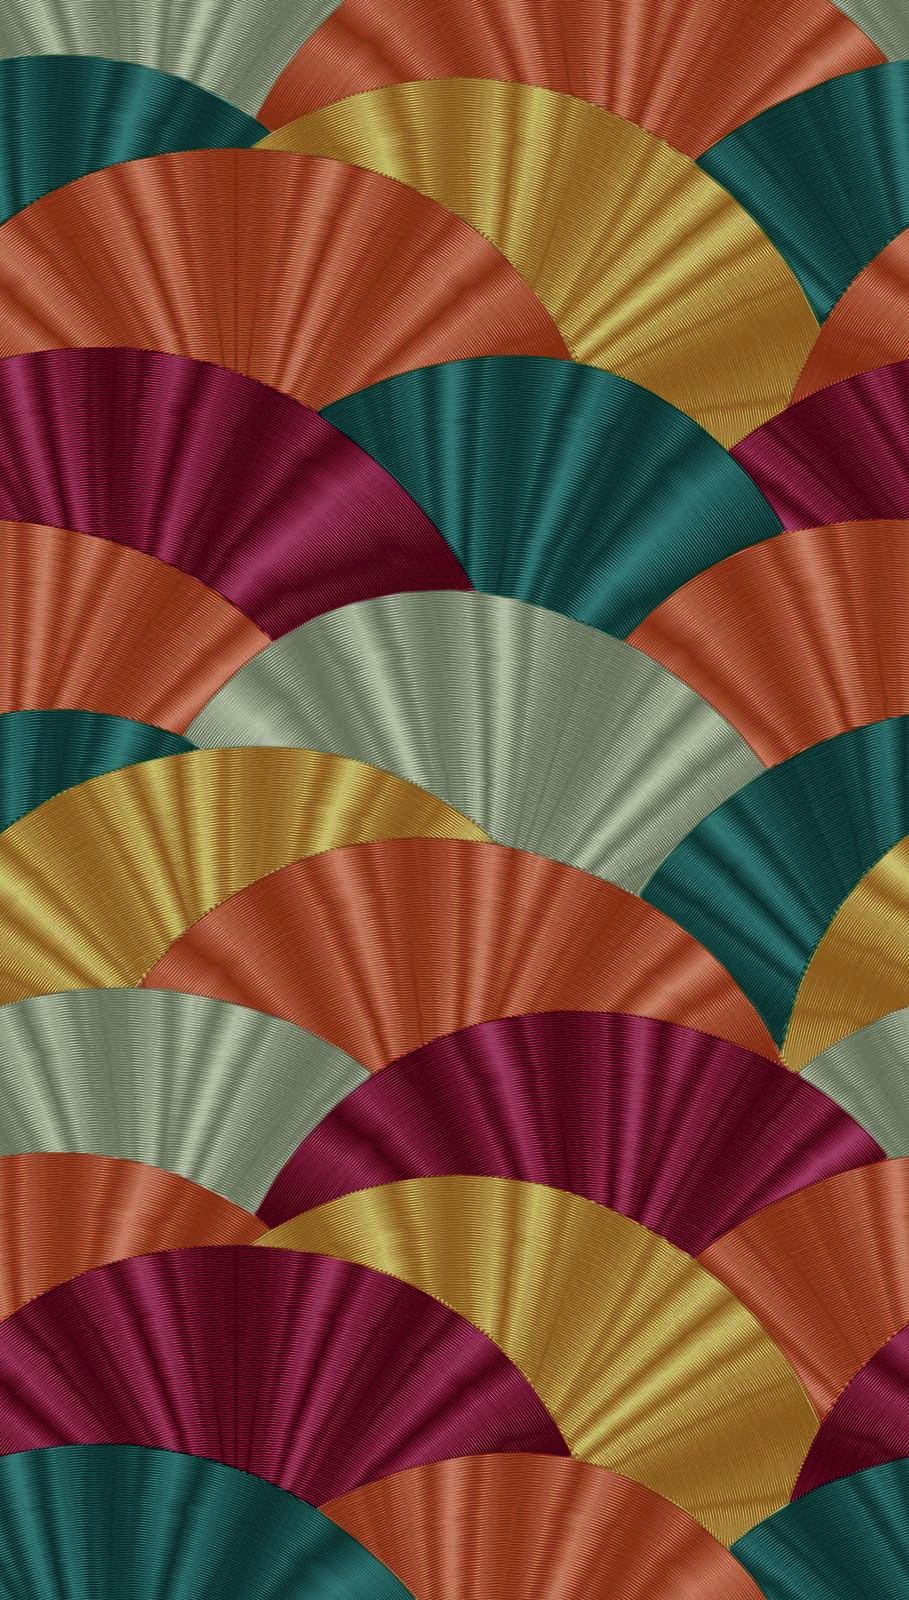             Colourful non-woven wallpaper with large fan pattern - multicoloured, red, turquoise
        